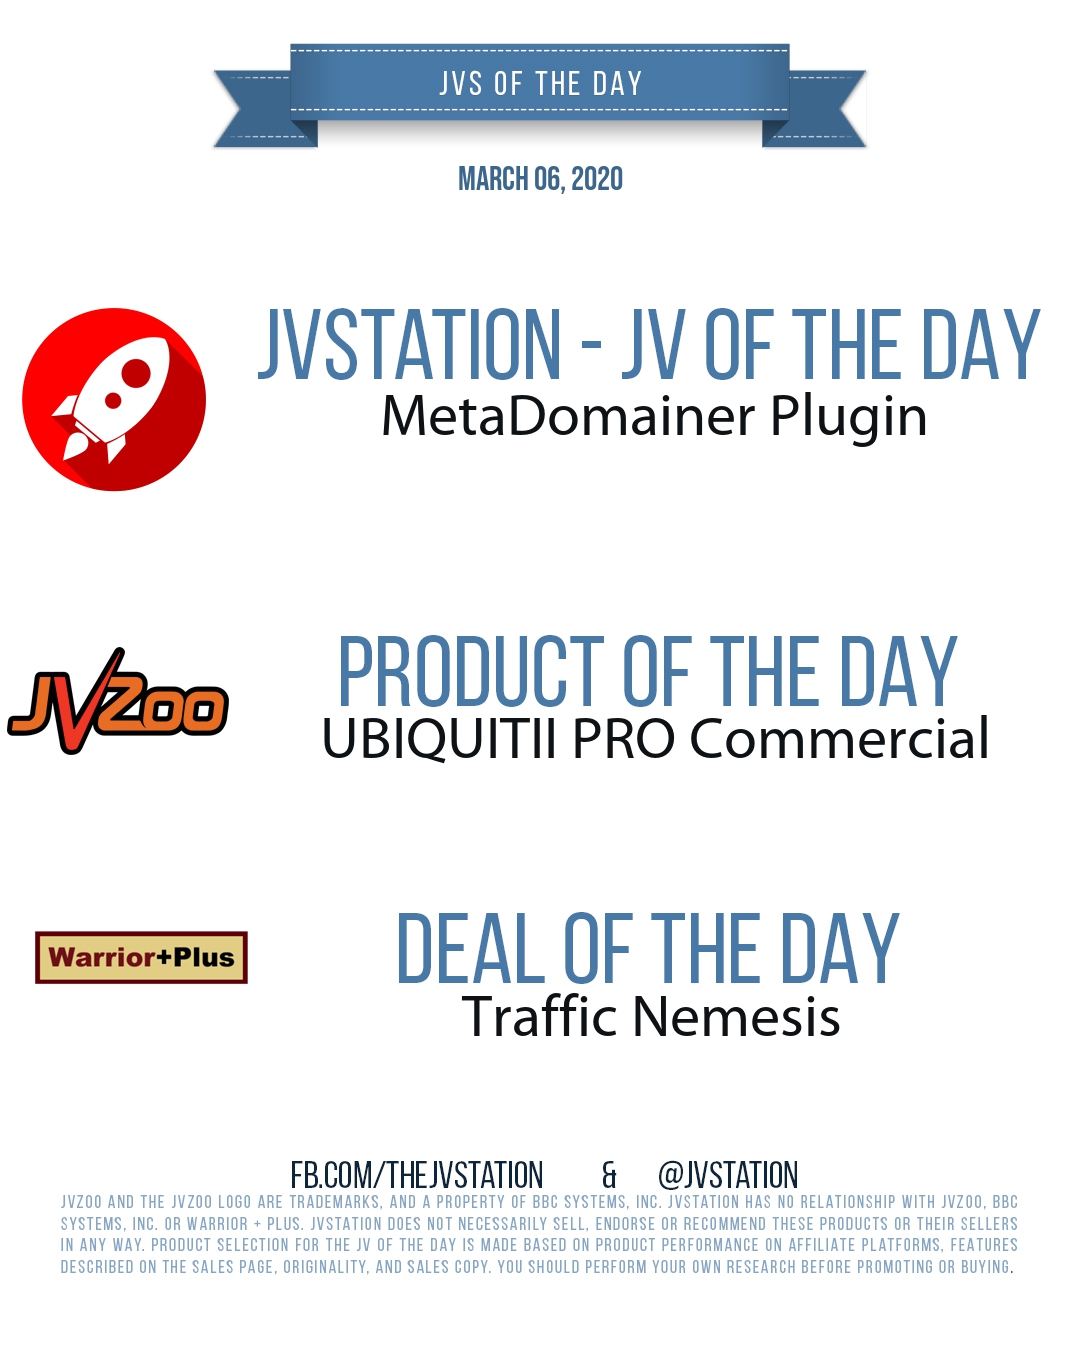 JVs of the day - March 06, 2020